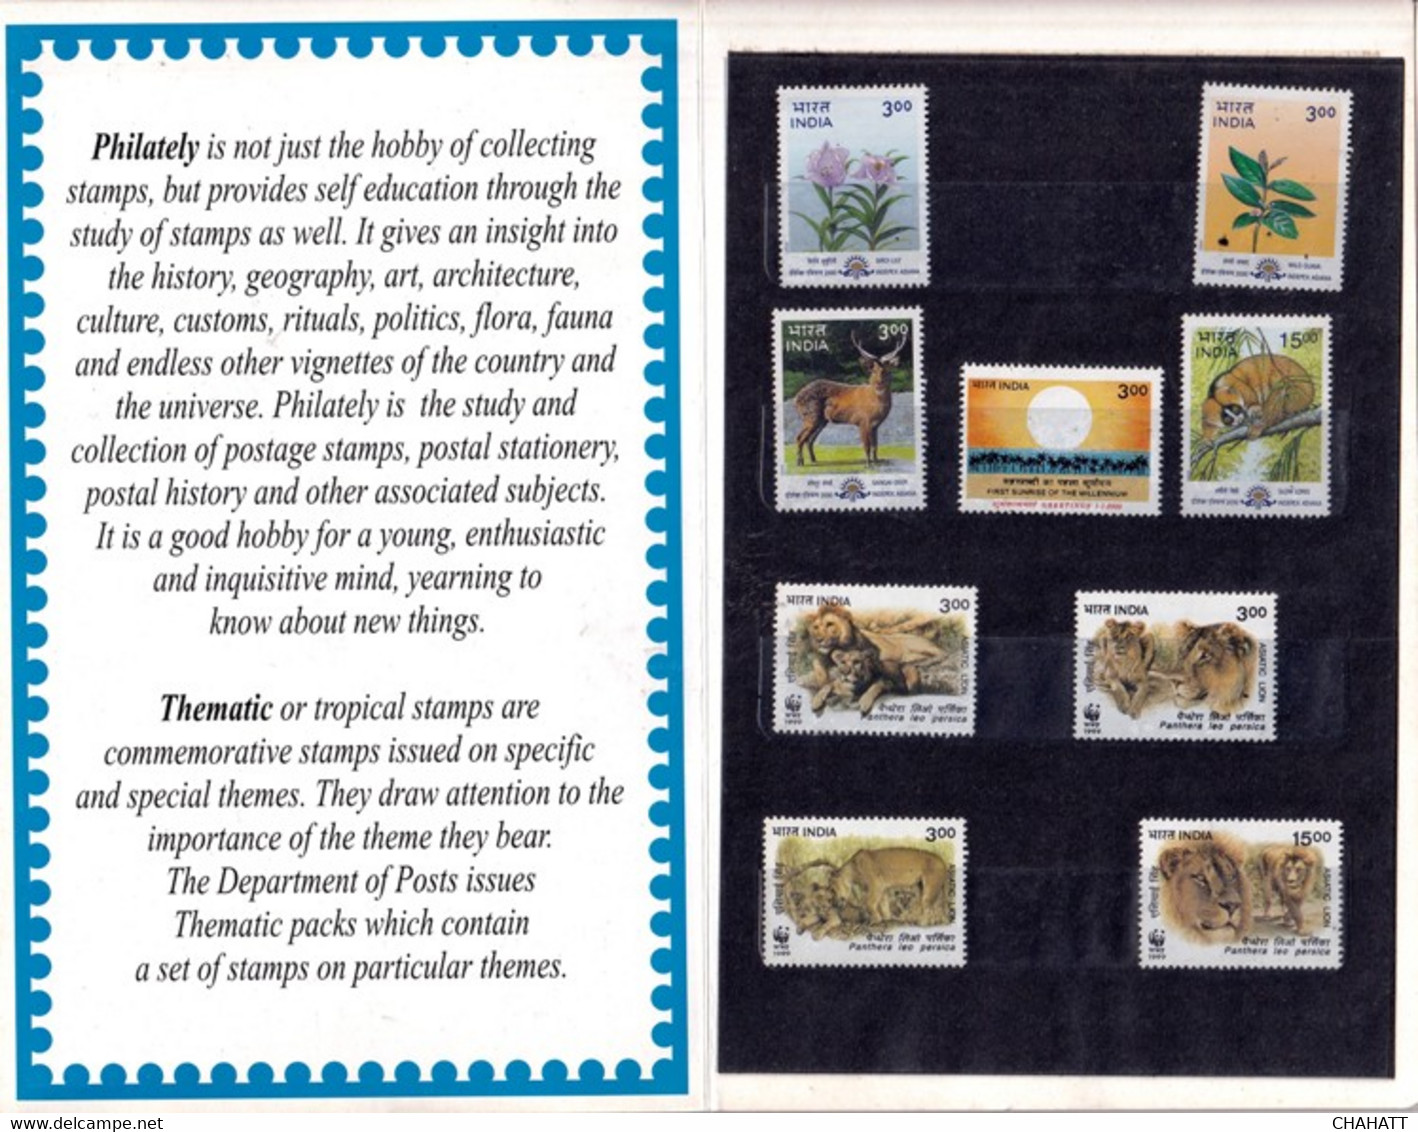 ASIATIC LIONS- WILD LIFE- FLOWERS-THEMATIC PACK-1999-MNH-SCARCE-BX2-38 - Colecciones & Series